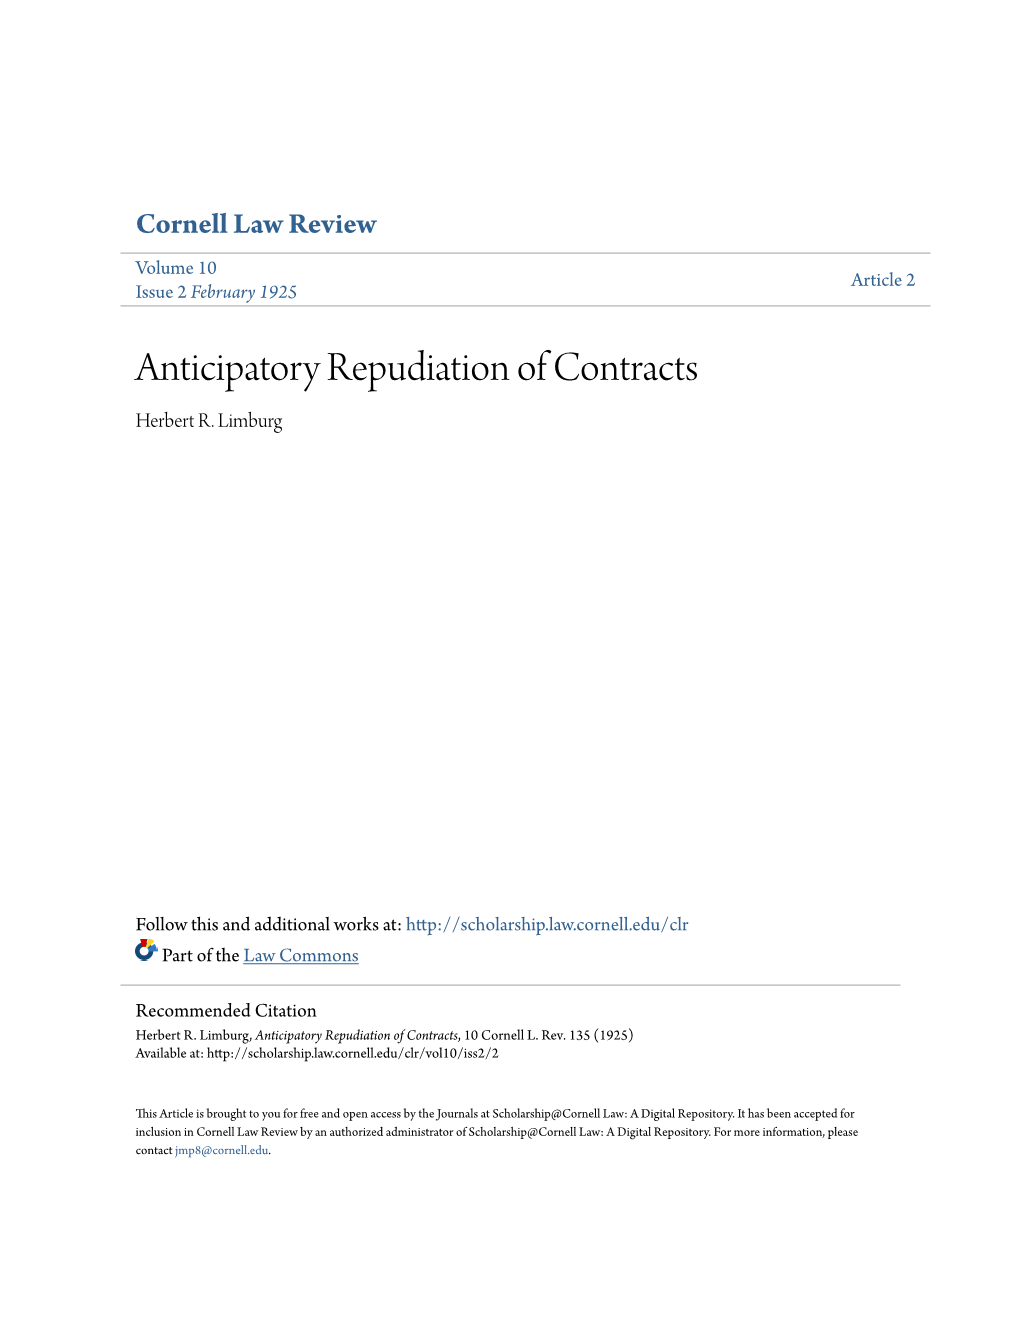 Anticipatory Repudiation of Contracts Herbert R